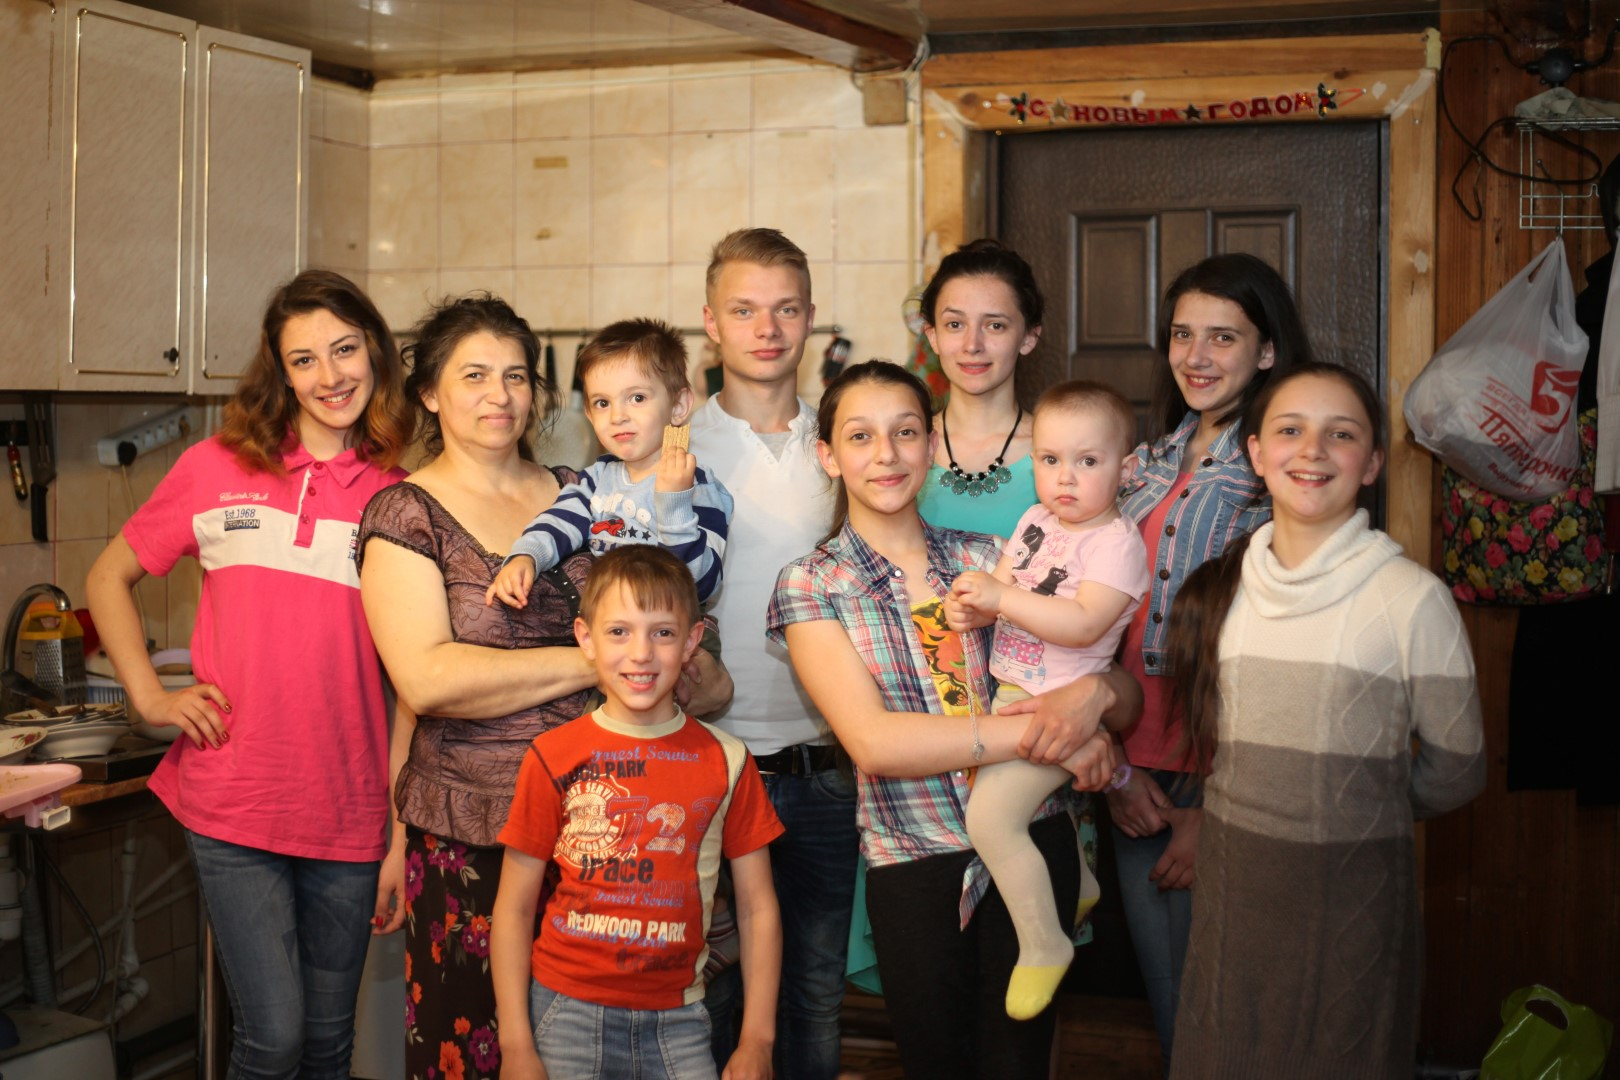 Poverty In Russia - A Family Desperately Needs Our Help! - Heart Small ganzes Ukraine Kinder Bilder